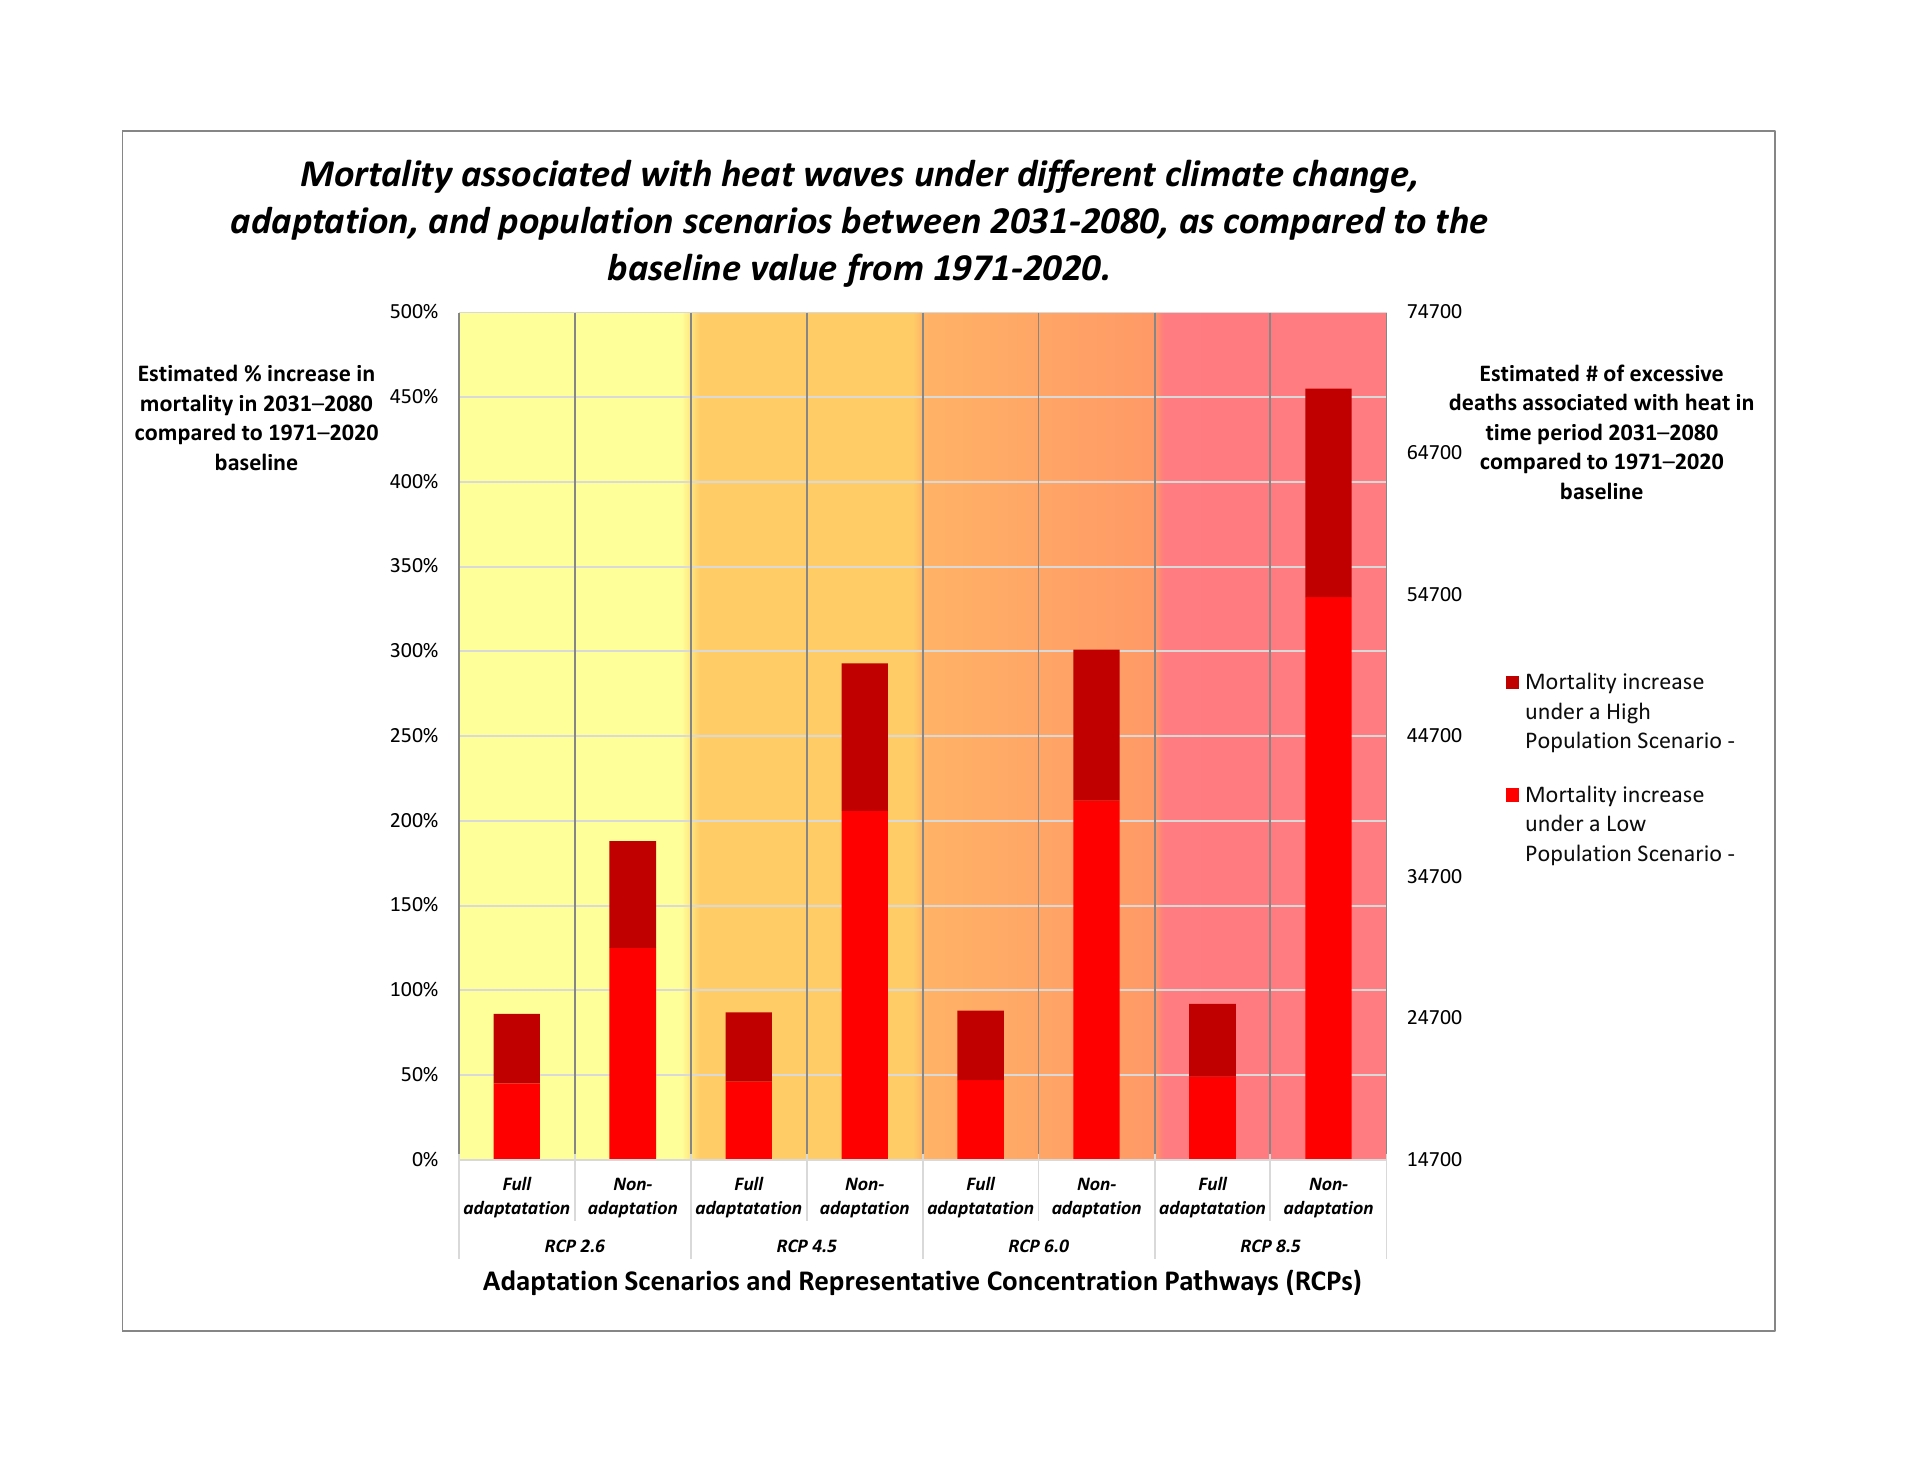 The graph shows how mortality associated with heat waves is expected to increase in Canada under various climate change, adaptation, and population scenarios.